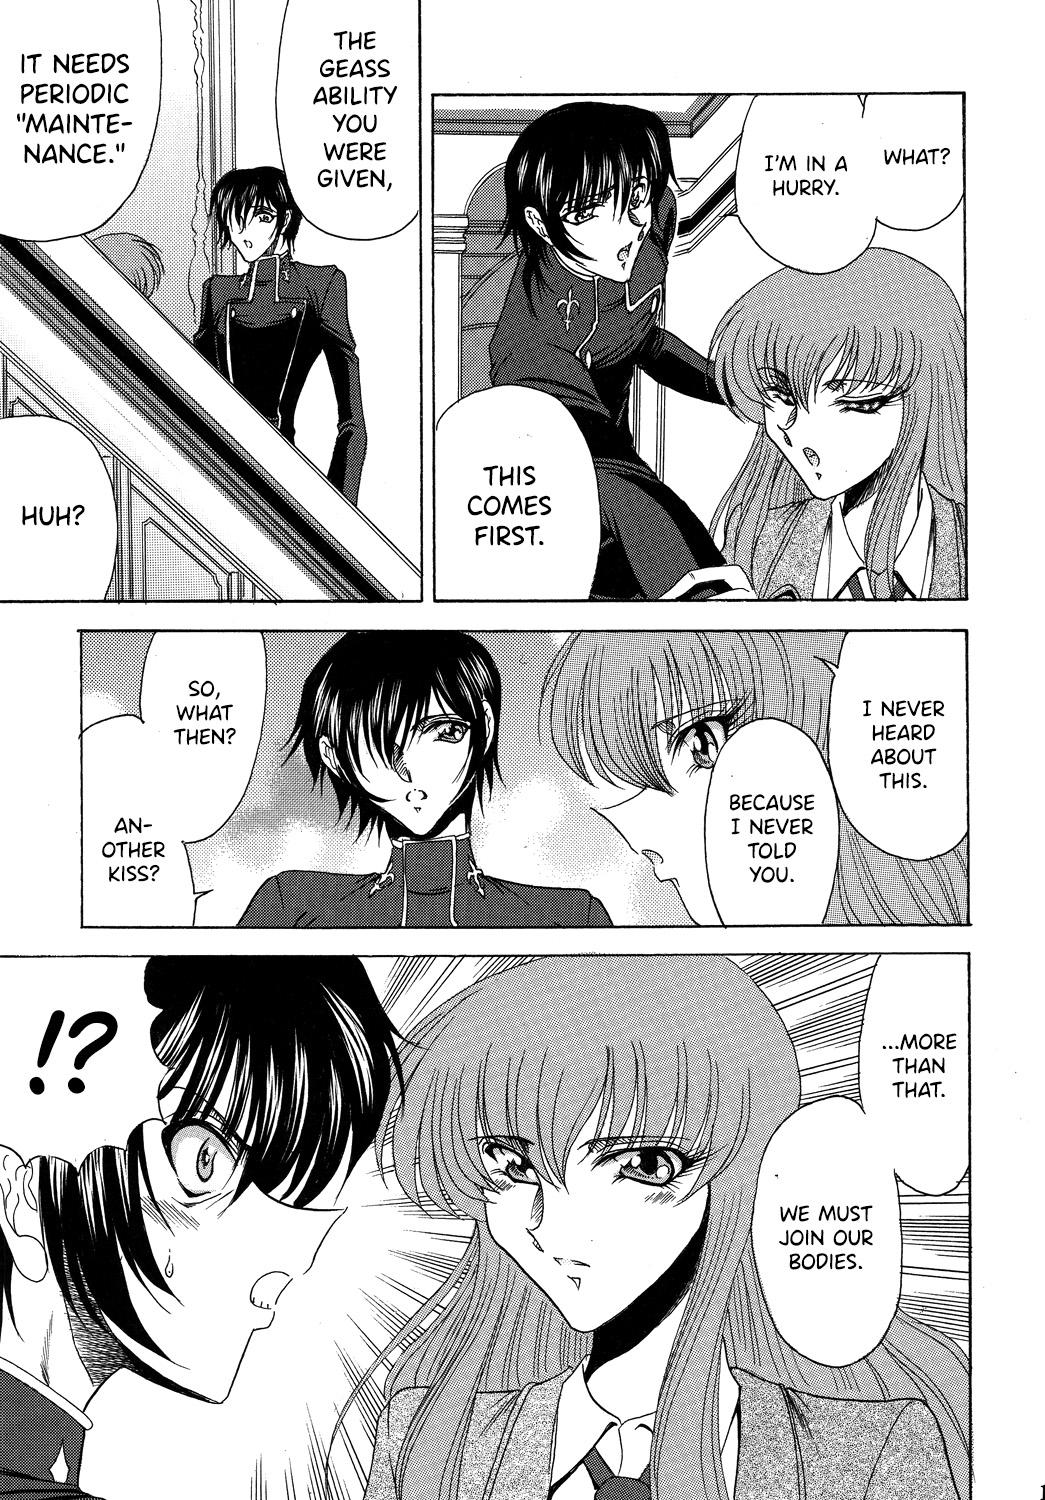 Face Fucking ZONE 43 Lelouch of the God Speed - Code geass Gay Bukkake - Page 10